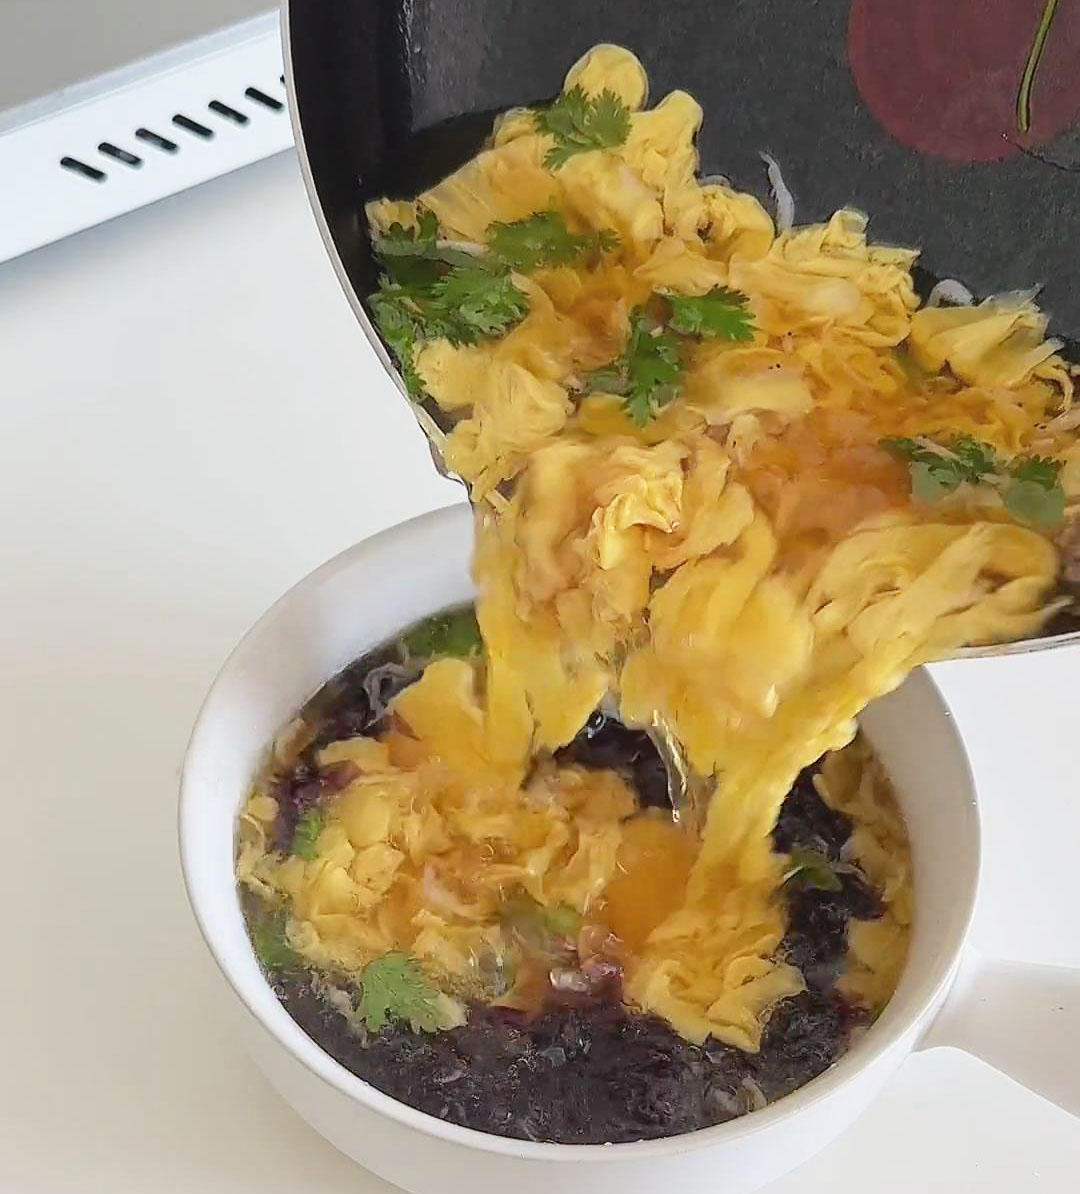 Pour the egg drop soup into the bowl of seaweed